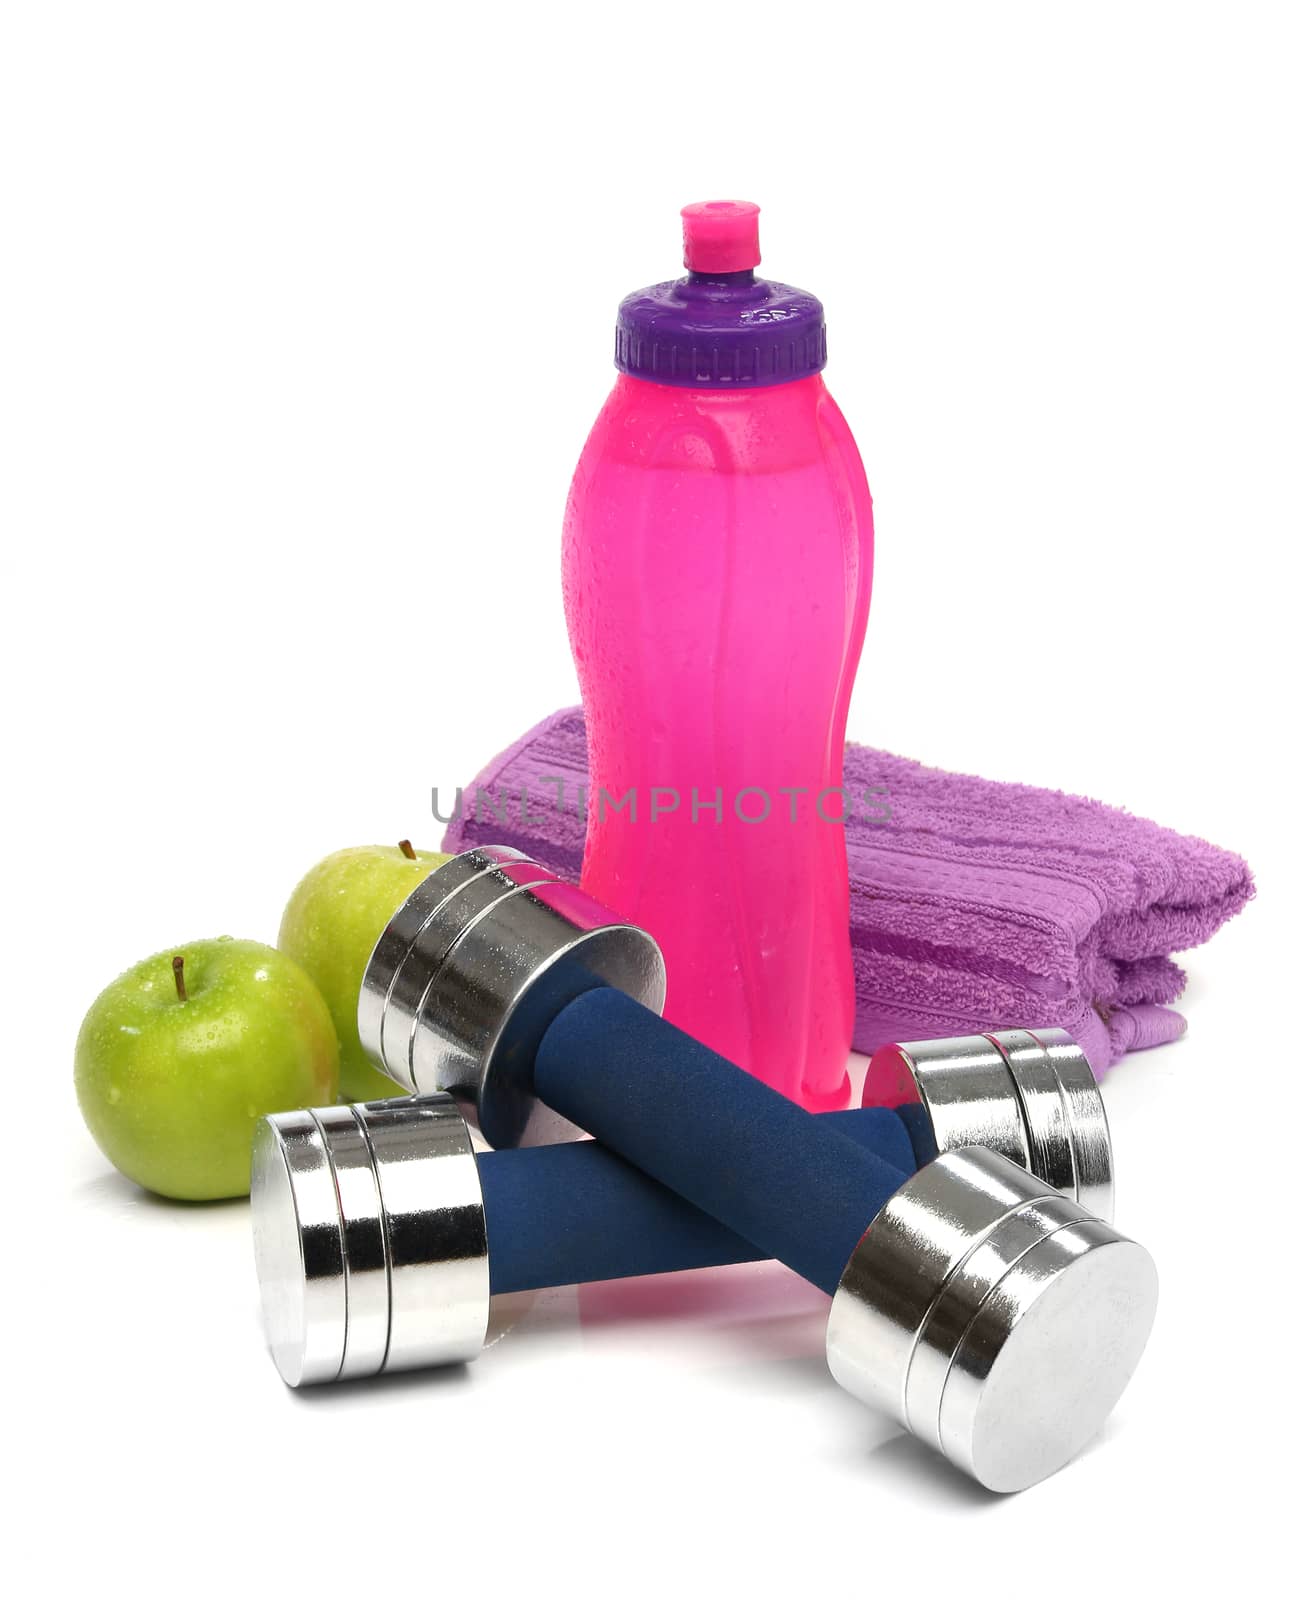 Fitness concept with a bottle of water, a towel, dumbbells and apples by Erdosain